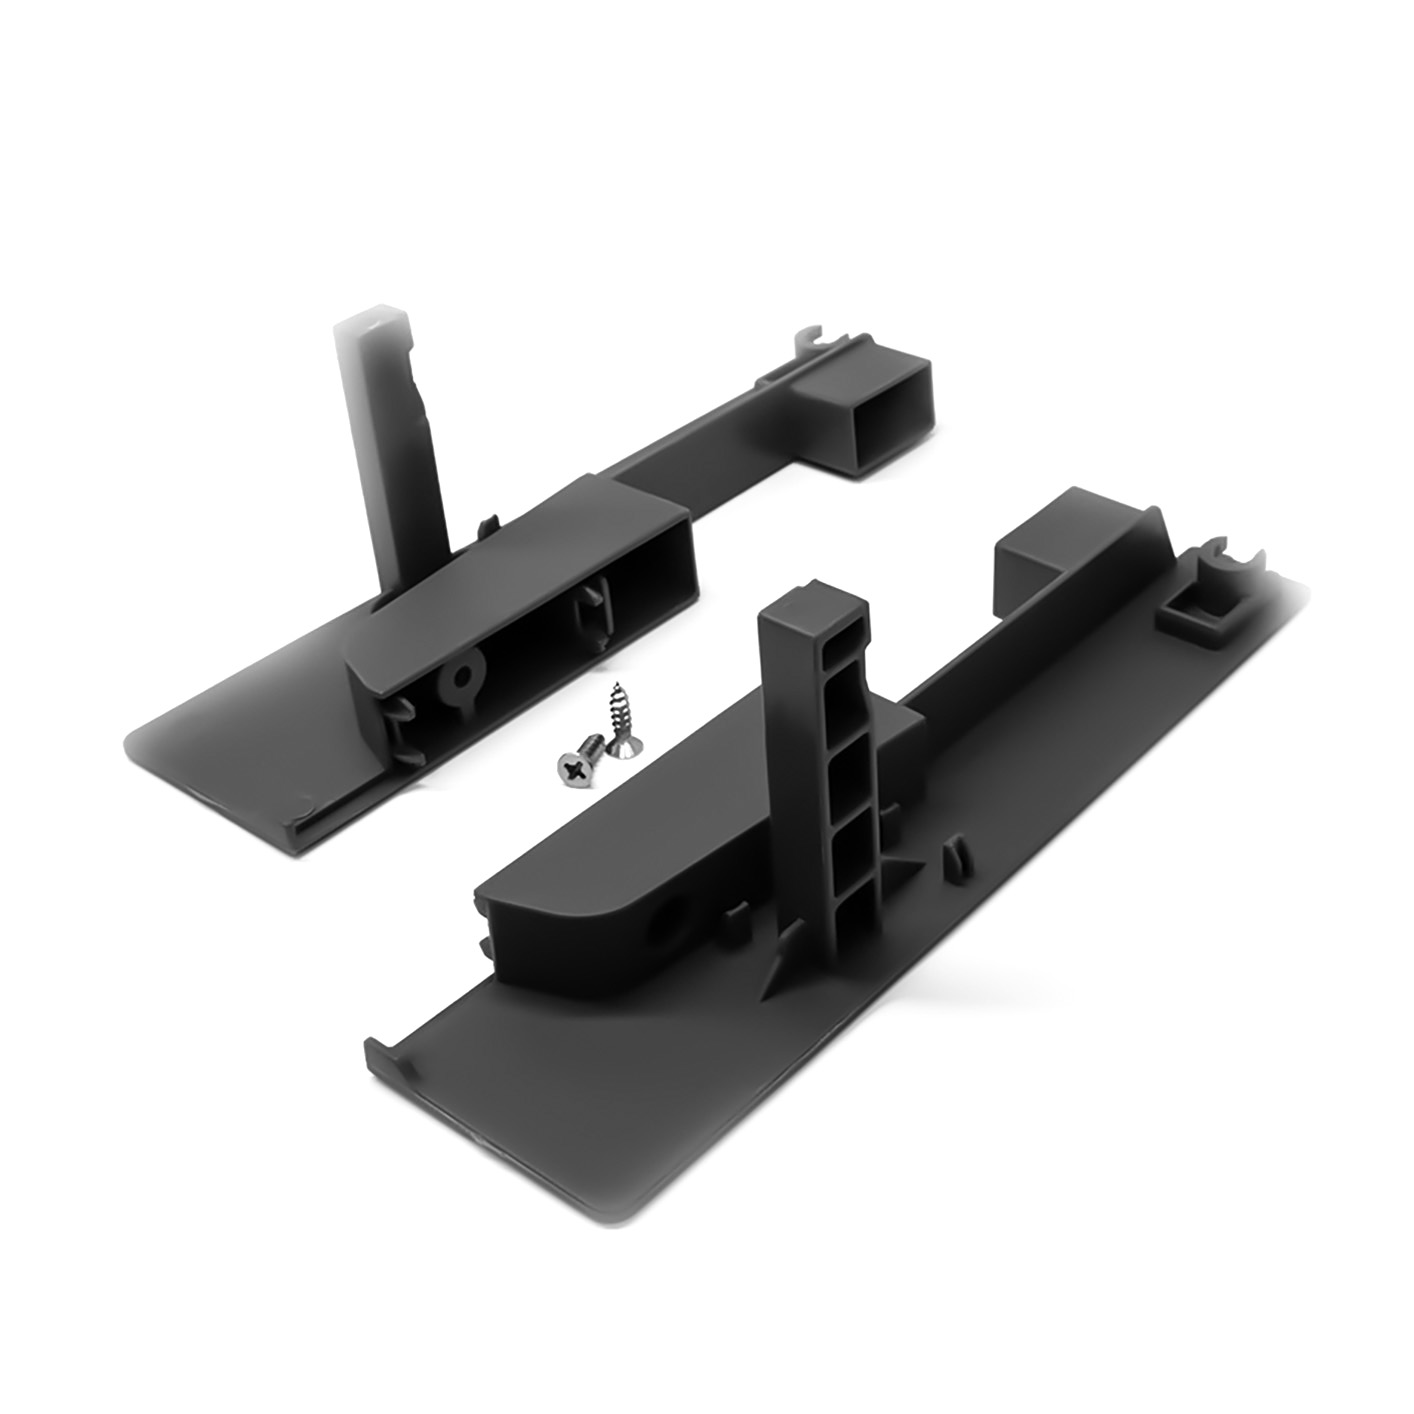 Front Fixing Bracket for Internal Drawer with Square Rails, 115 mm Height Sides